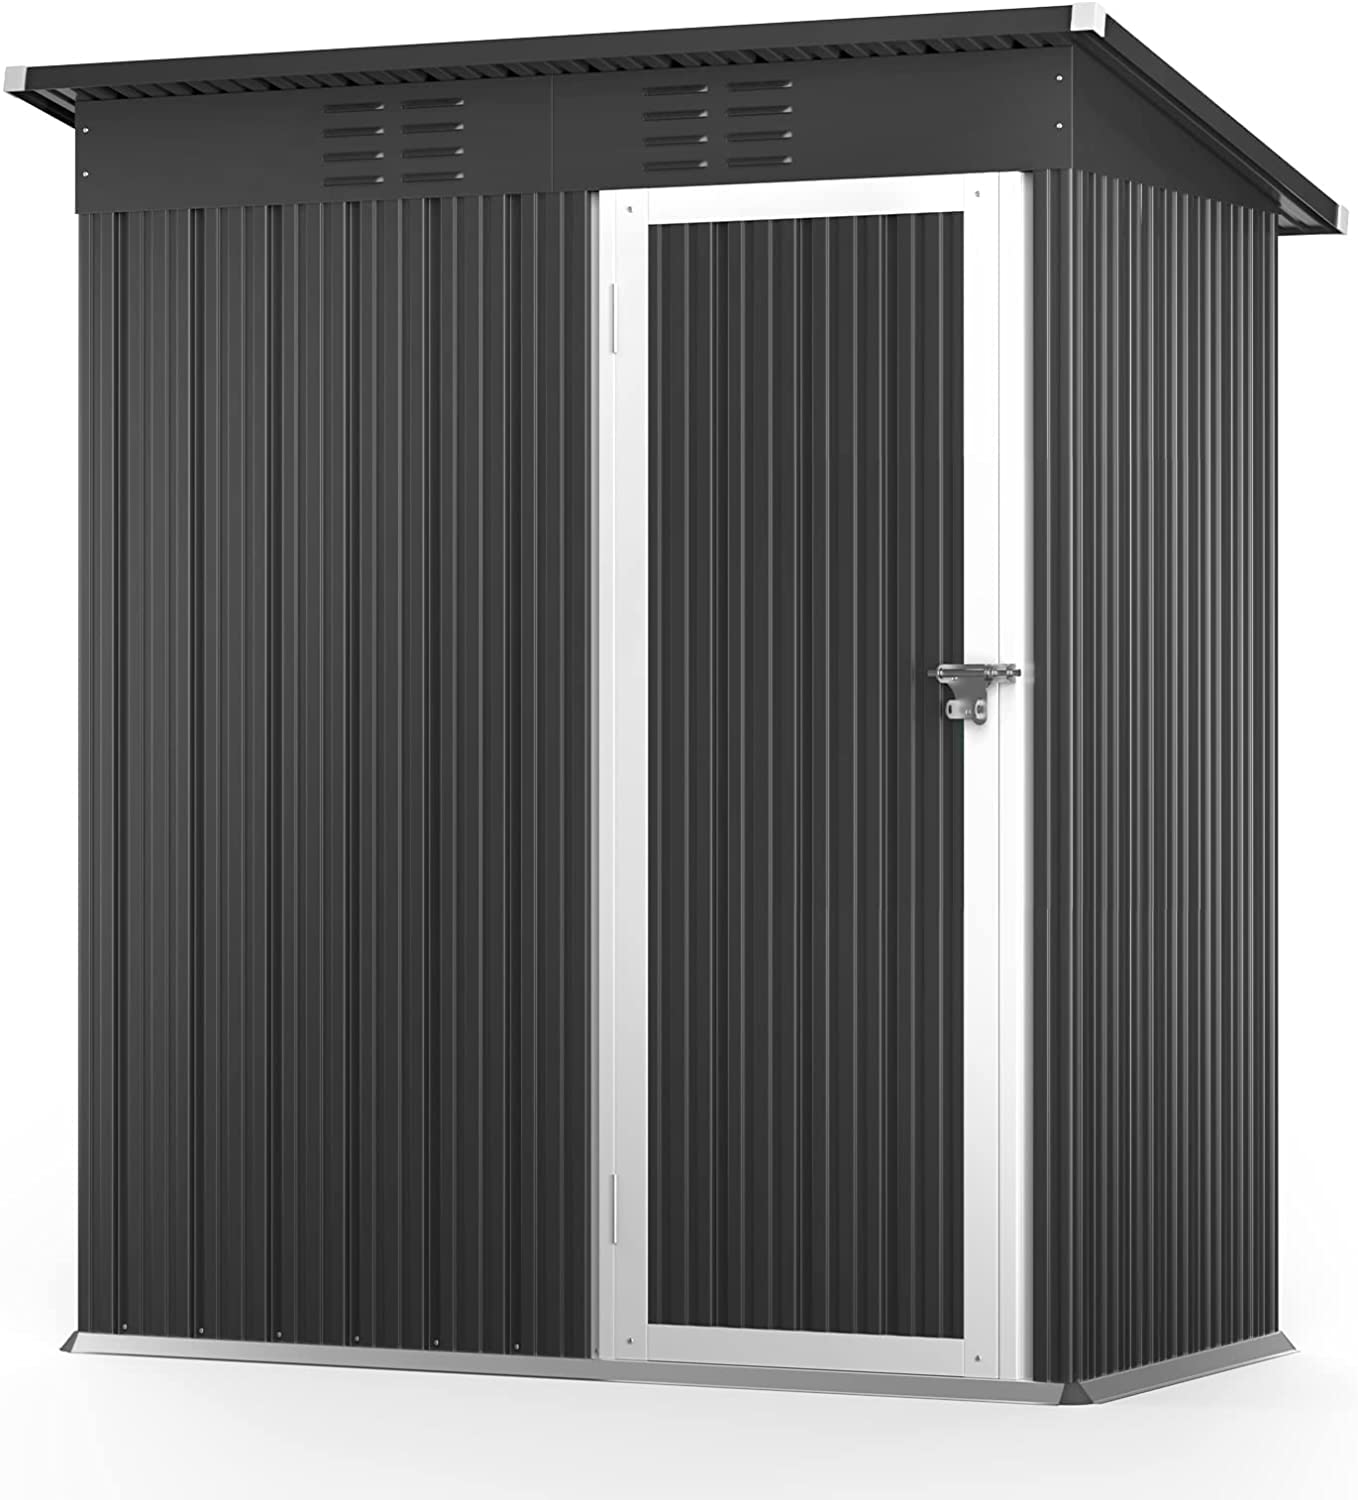 5' x 3' Outdoor Storage Shed, Metal Outdoor Storage Cabinet with Single Lockable Door, Waterproof Tool Shed,Gray - image 5 of 8